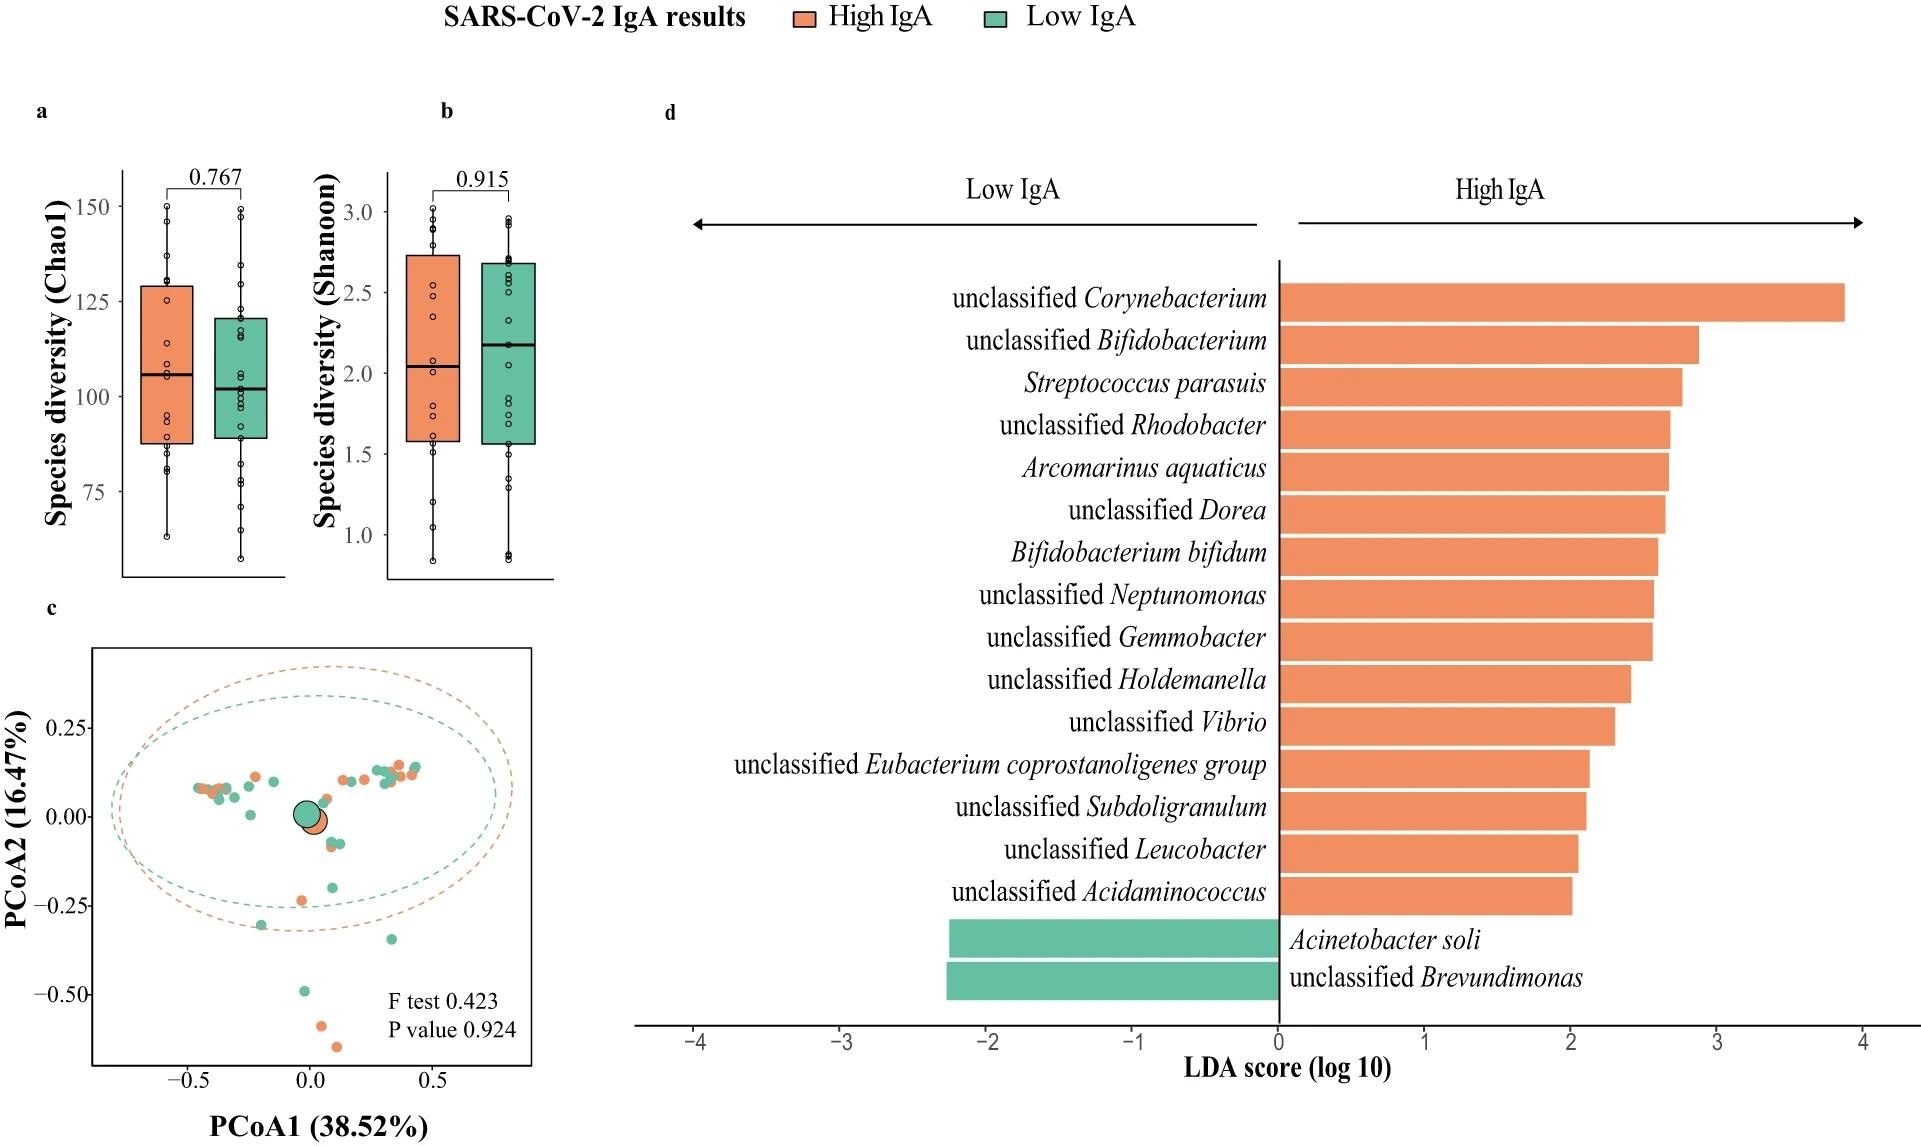 Breast milk microbiota composition in mothers with high and low responses at one week post-second dose of BNT162b2 (N = 43; High IgA: 18, Low IgA: 25). a Bacteria diversity. b Bacteria richness. P value comparing the diversity and richness were given by Wilcoxon rank-sum test. c Principal coordinates analysis (PCoA) of breast milk microbiota composition of mothers with high- and low-IgA levels at one week post-second dose of BNT162b2. p value was given by PERMANOVA. d Linear discriminant analysis effect size analysis of discriminant taxa in breast milk microbiome of mothers with high- and low-IgA levels at one week post-second dose of BNT162b2. LDA linear discriminant analysis. Elements on boxplots: centre line, median; box limits, upper and lower quartiles; whiskers, 1.5×IQR.